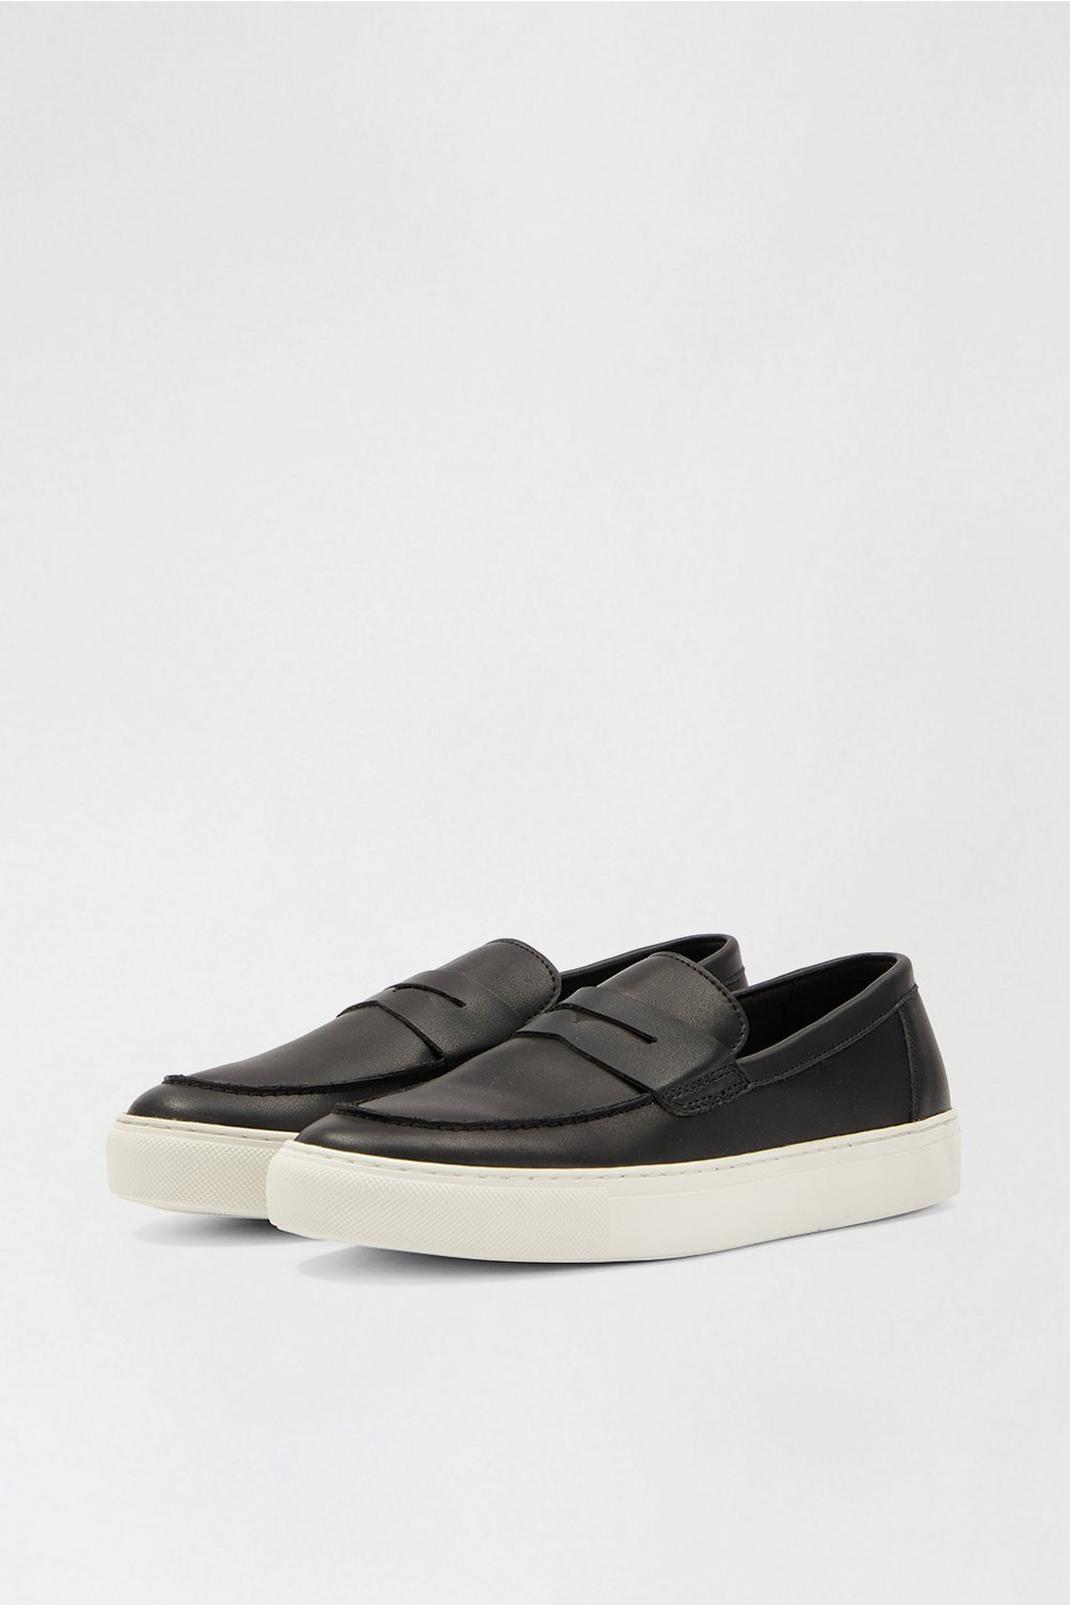 105 Black Slip On Shoes With Band Detail image number 2